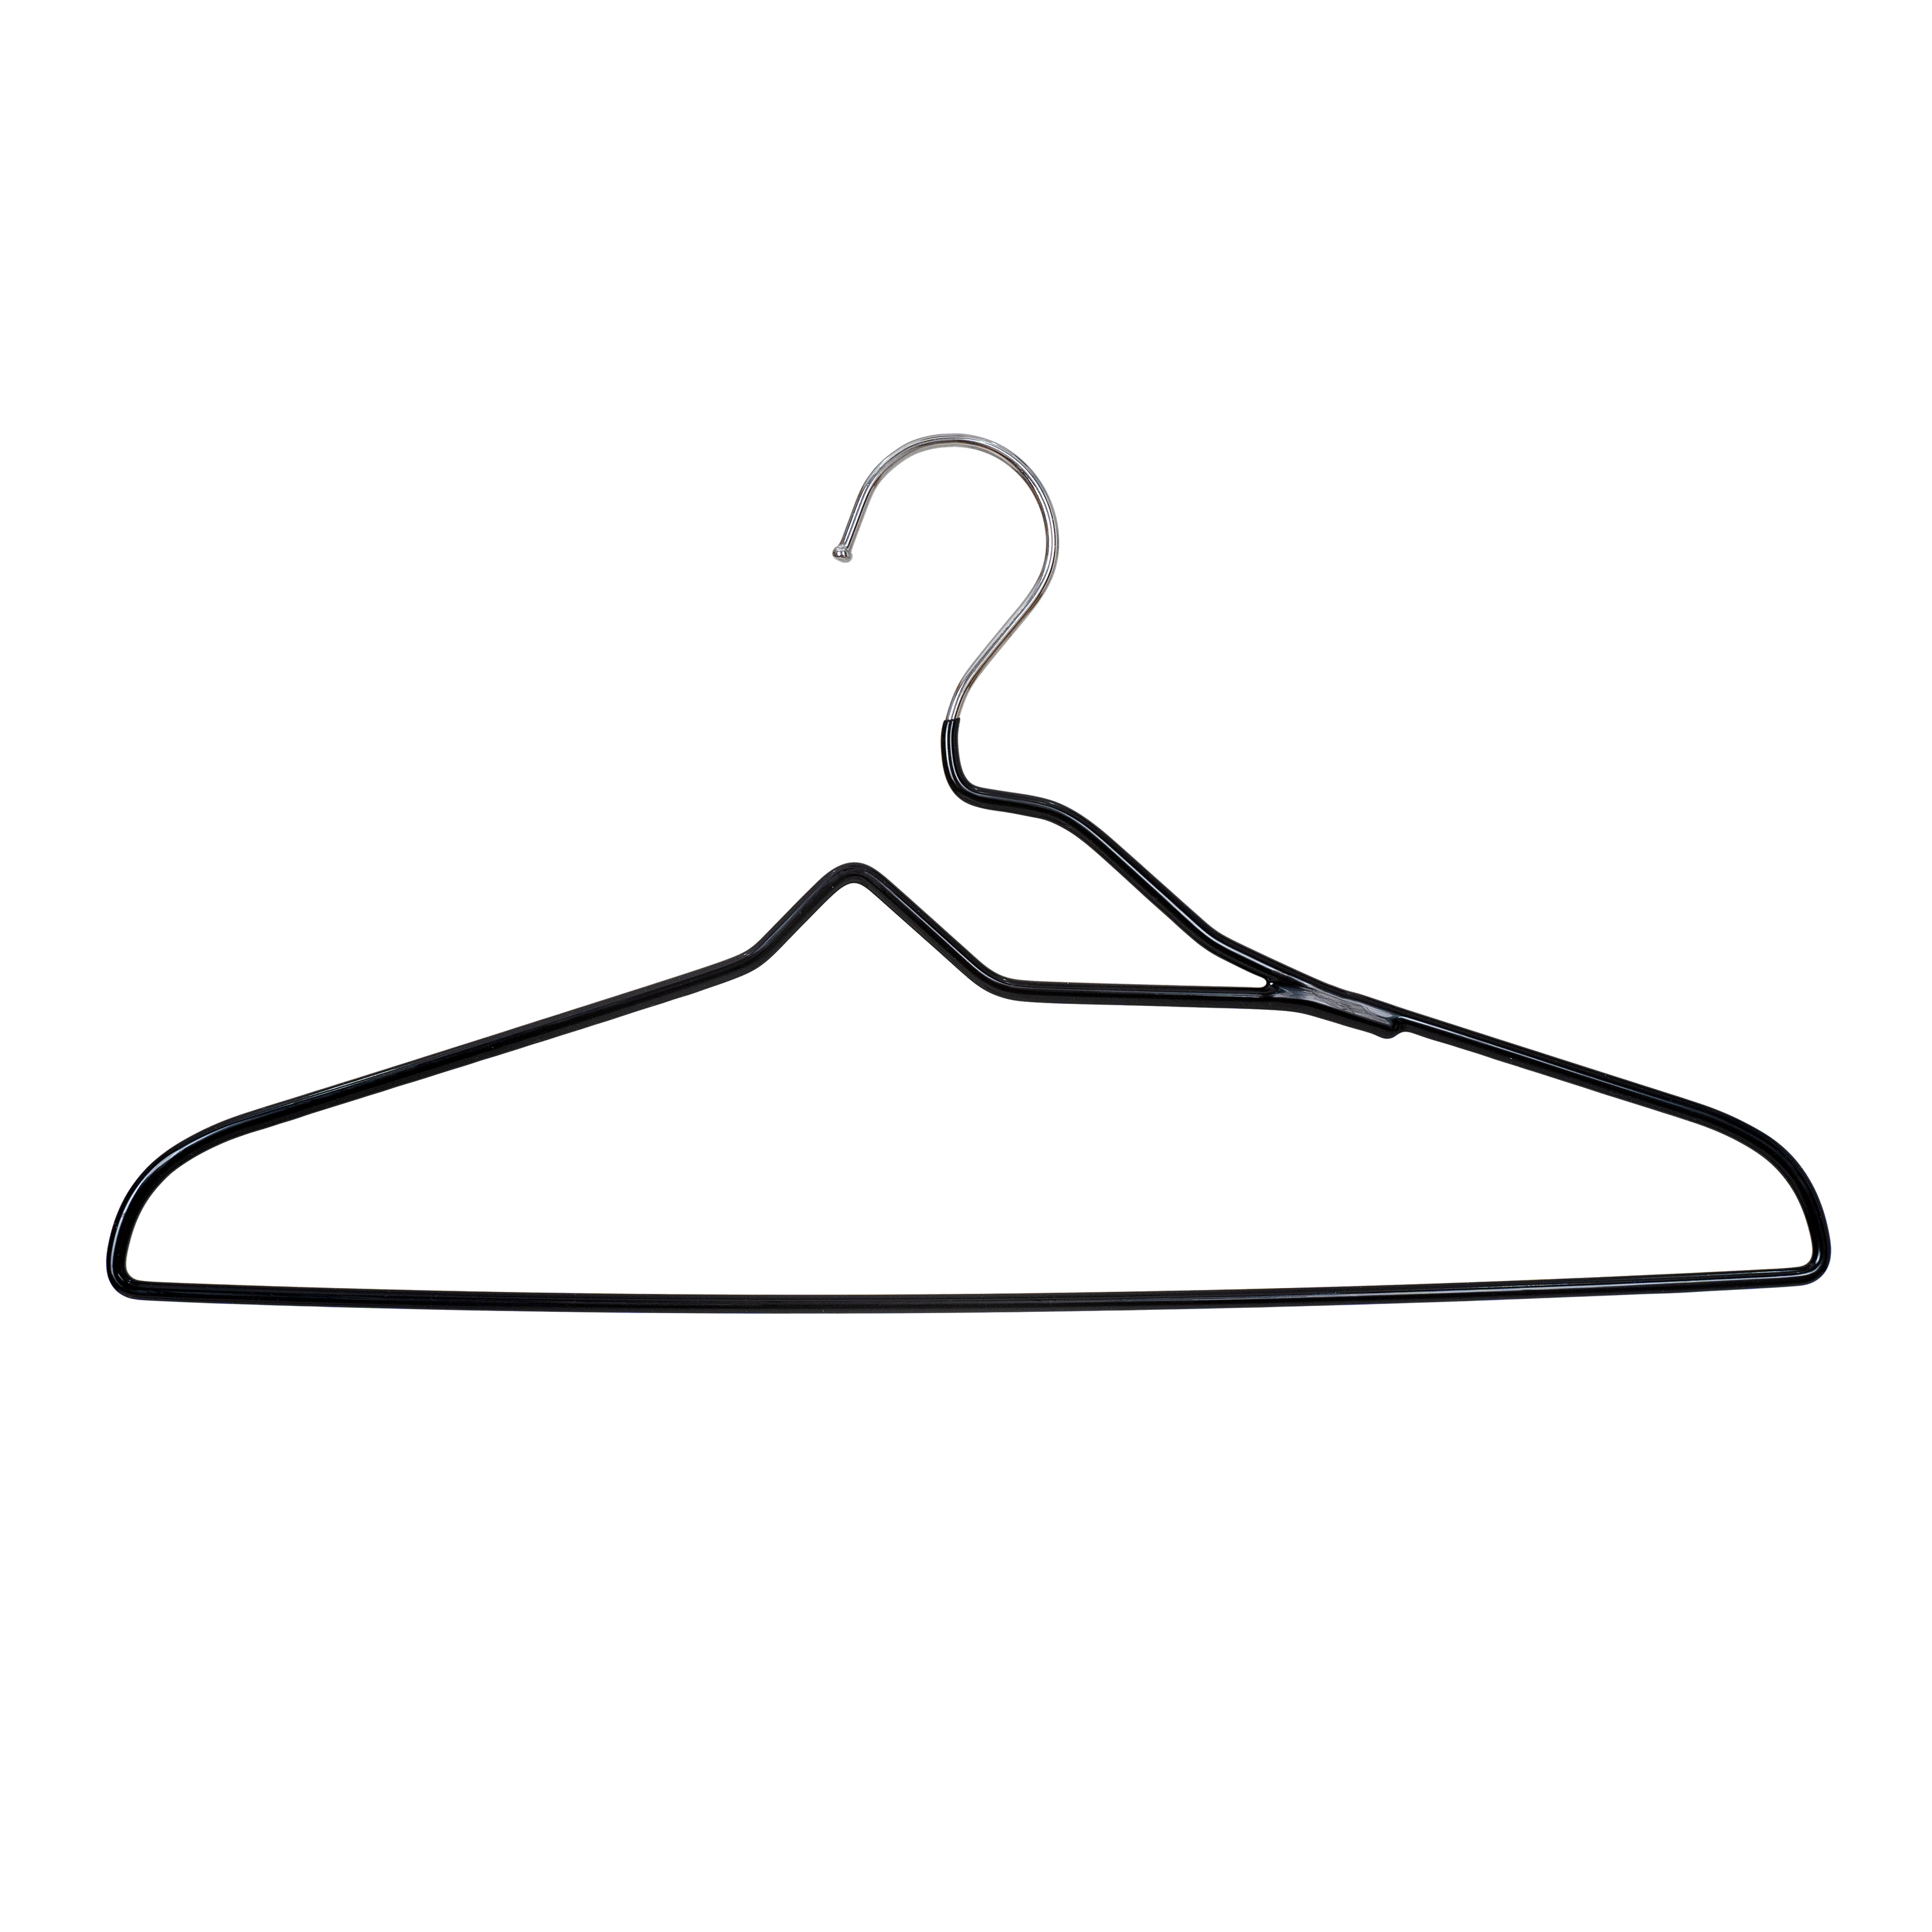 Better Homes & Gardens Non-Slip Clothes Hangers for Adult, 10 Pack, Black, Rubberized Chromef - image 1 of 6